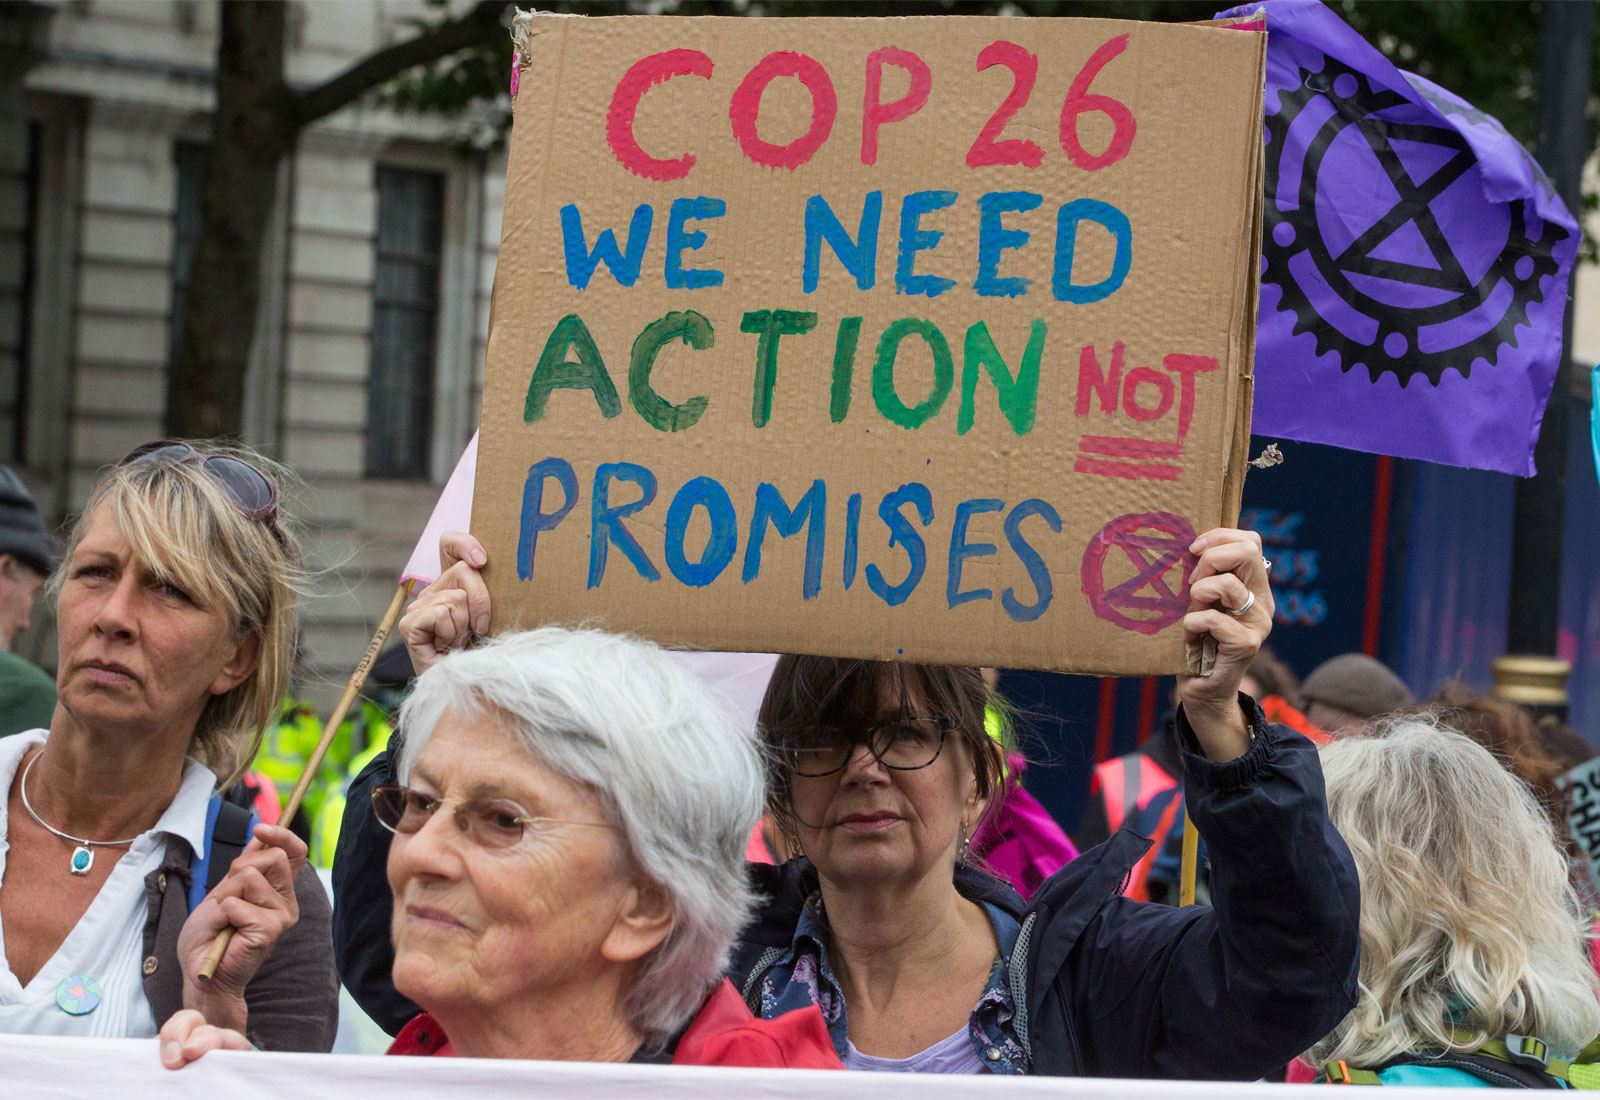 Person with dark brown hair holds up a sign that says "COP 26 WE NEED ACTION NOT PROMISES"